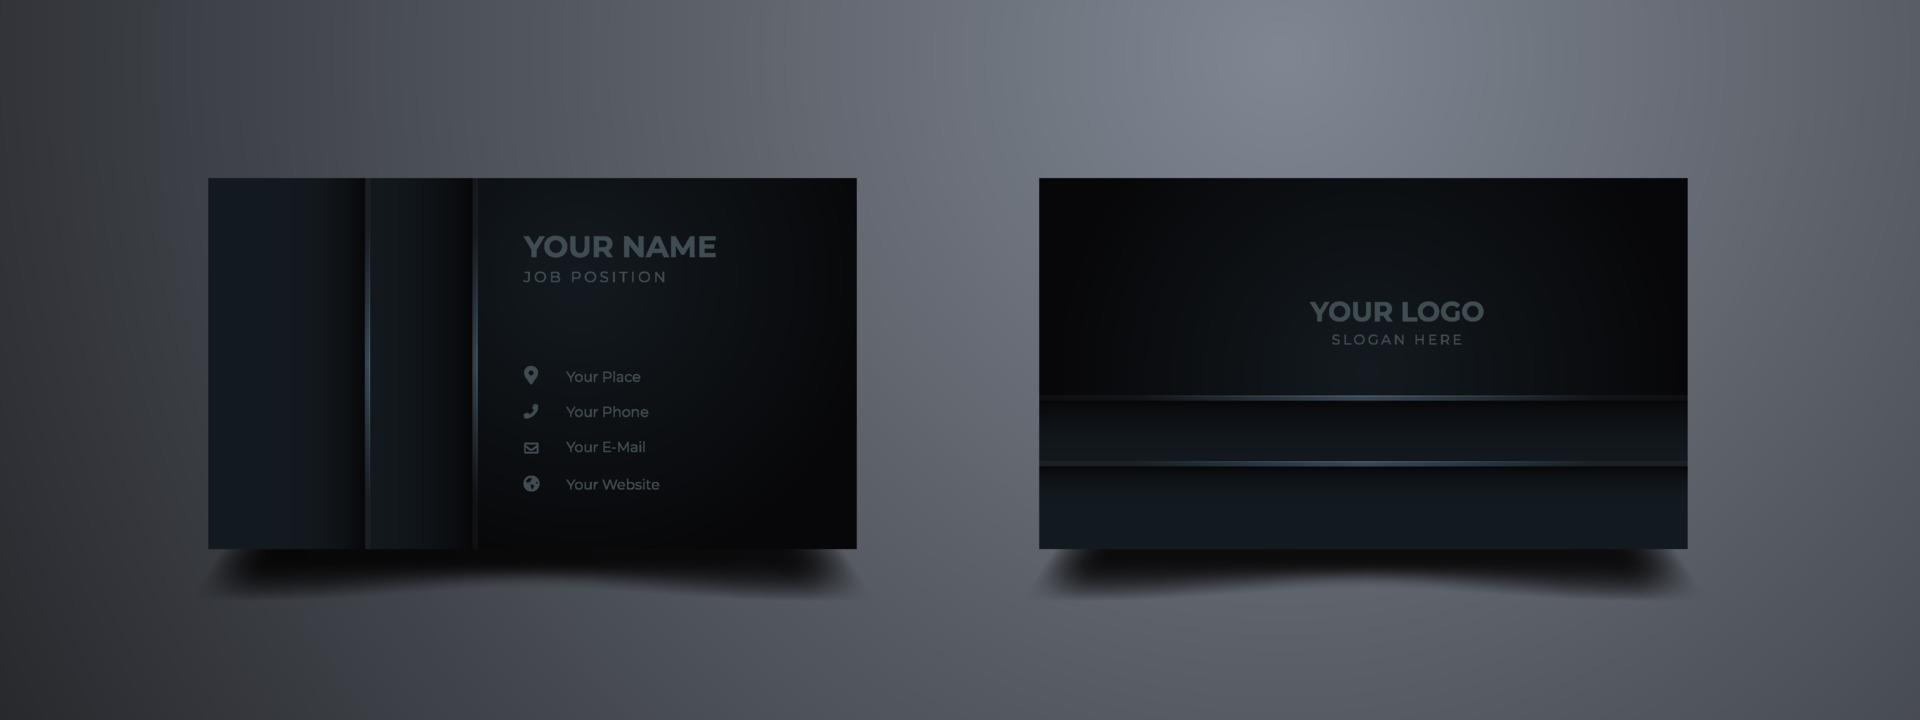 Luxury business card with realistic shape. Dark gradient abstract background. Vector illustration ready to print.